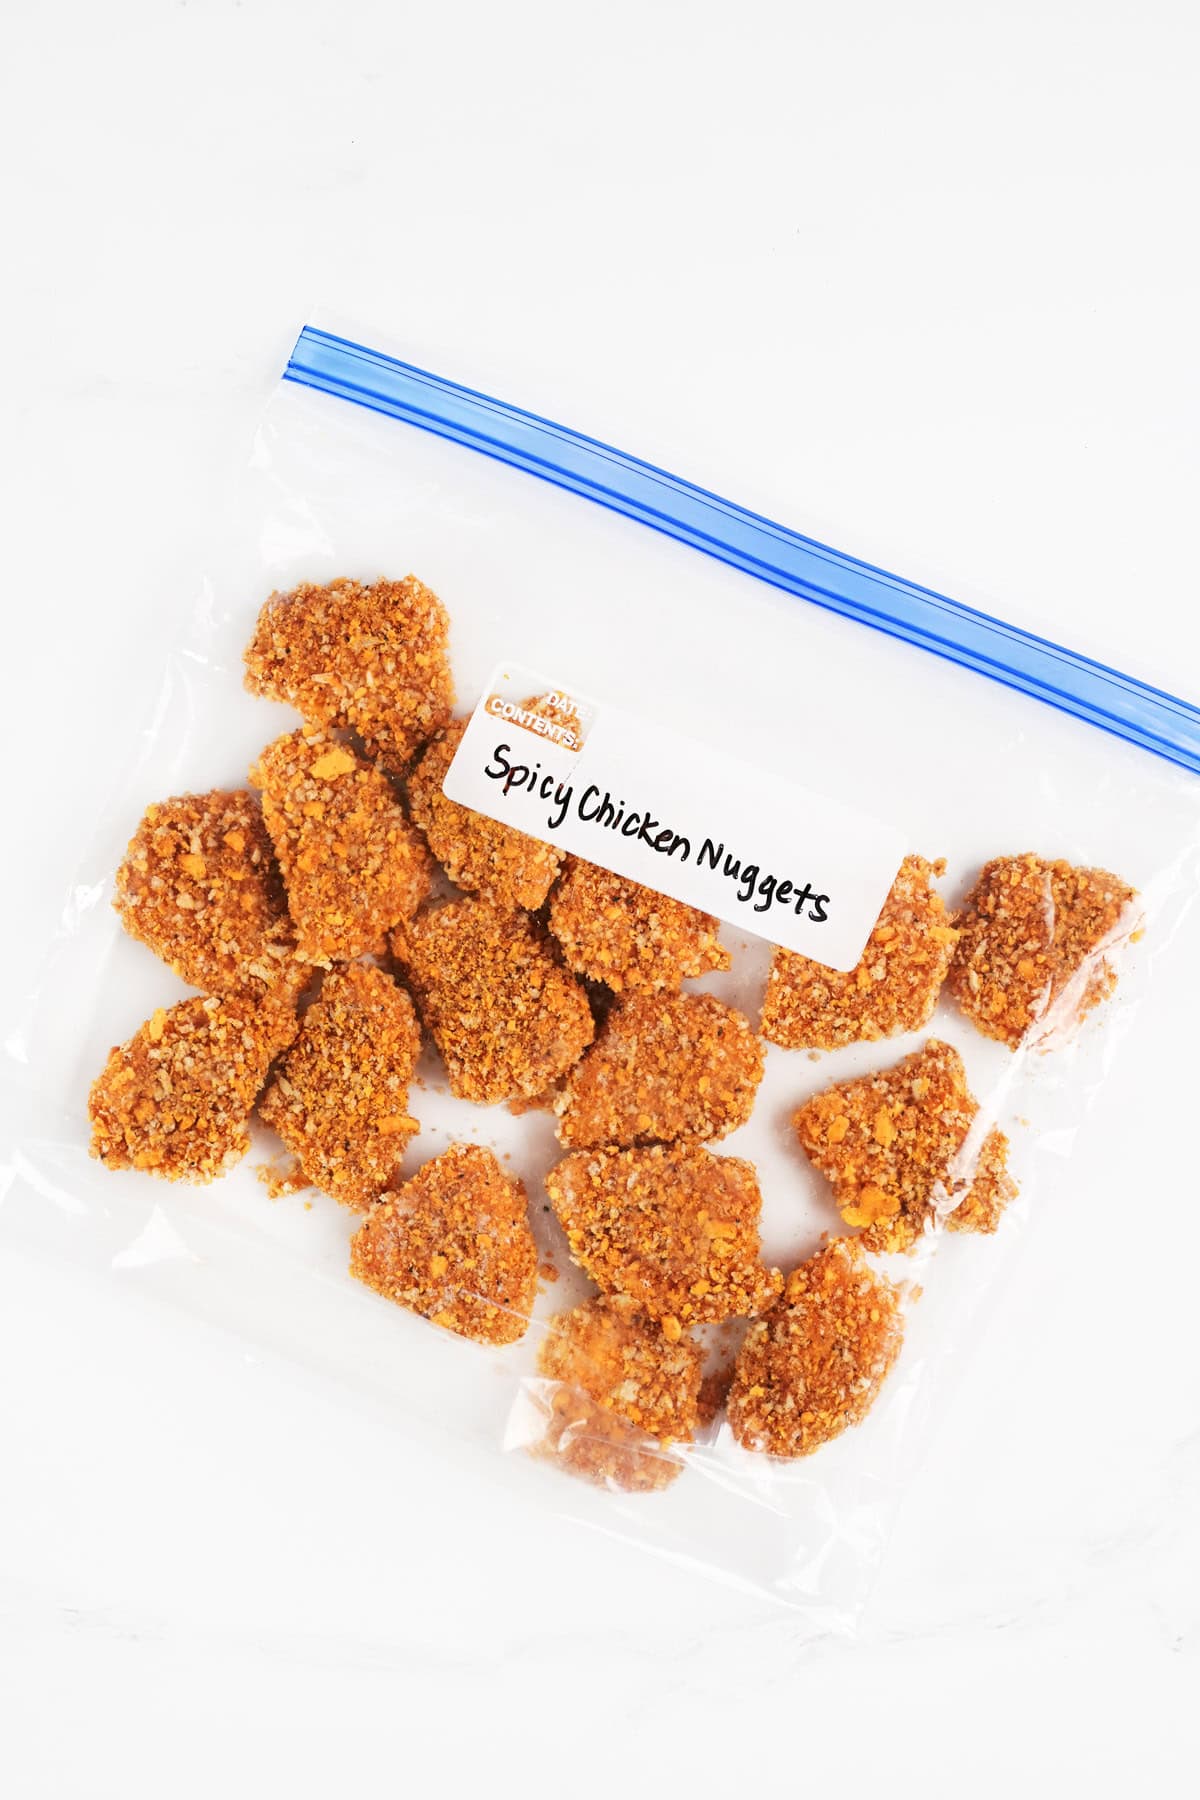 Spicy chicken nuggets in a labeled gallon sized ziptop bag.